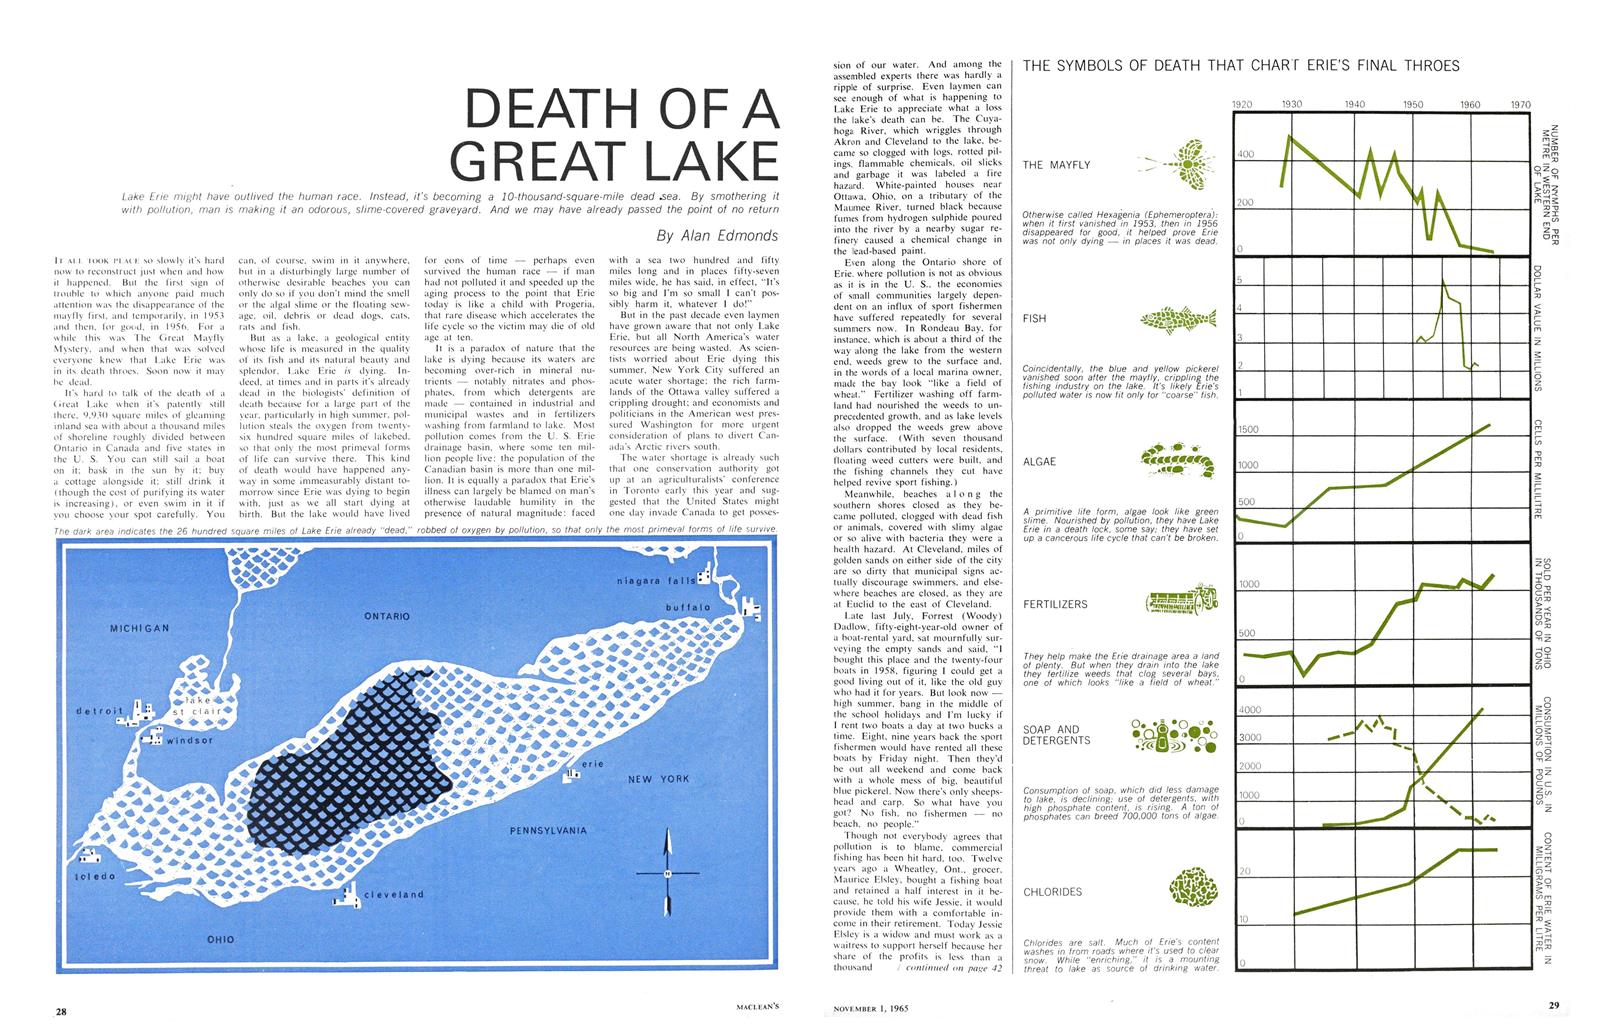 A Maclean’s magazine article from 1965 titled “Death of a Great Lake.” 